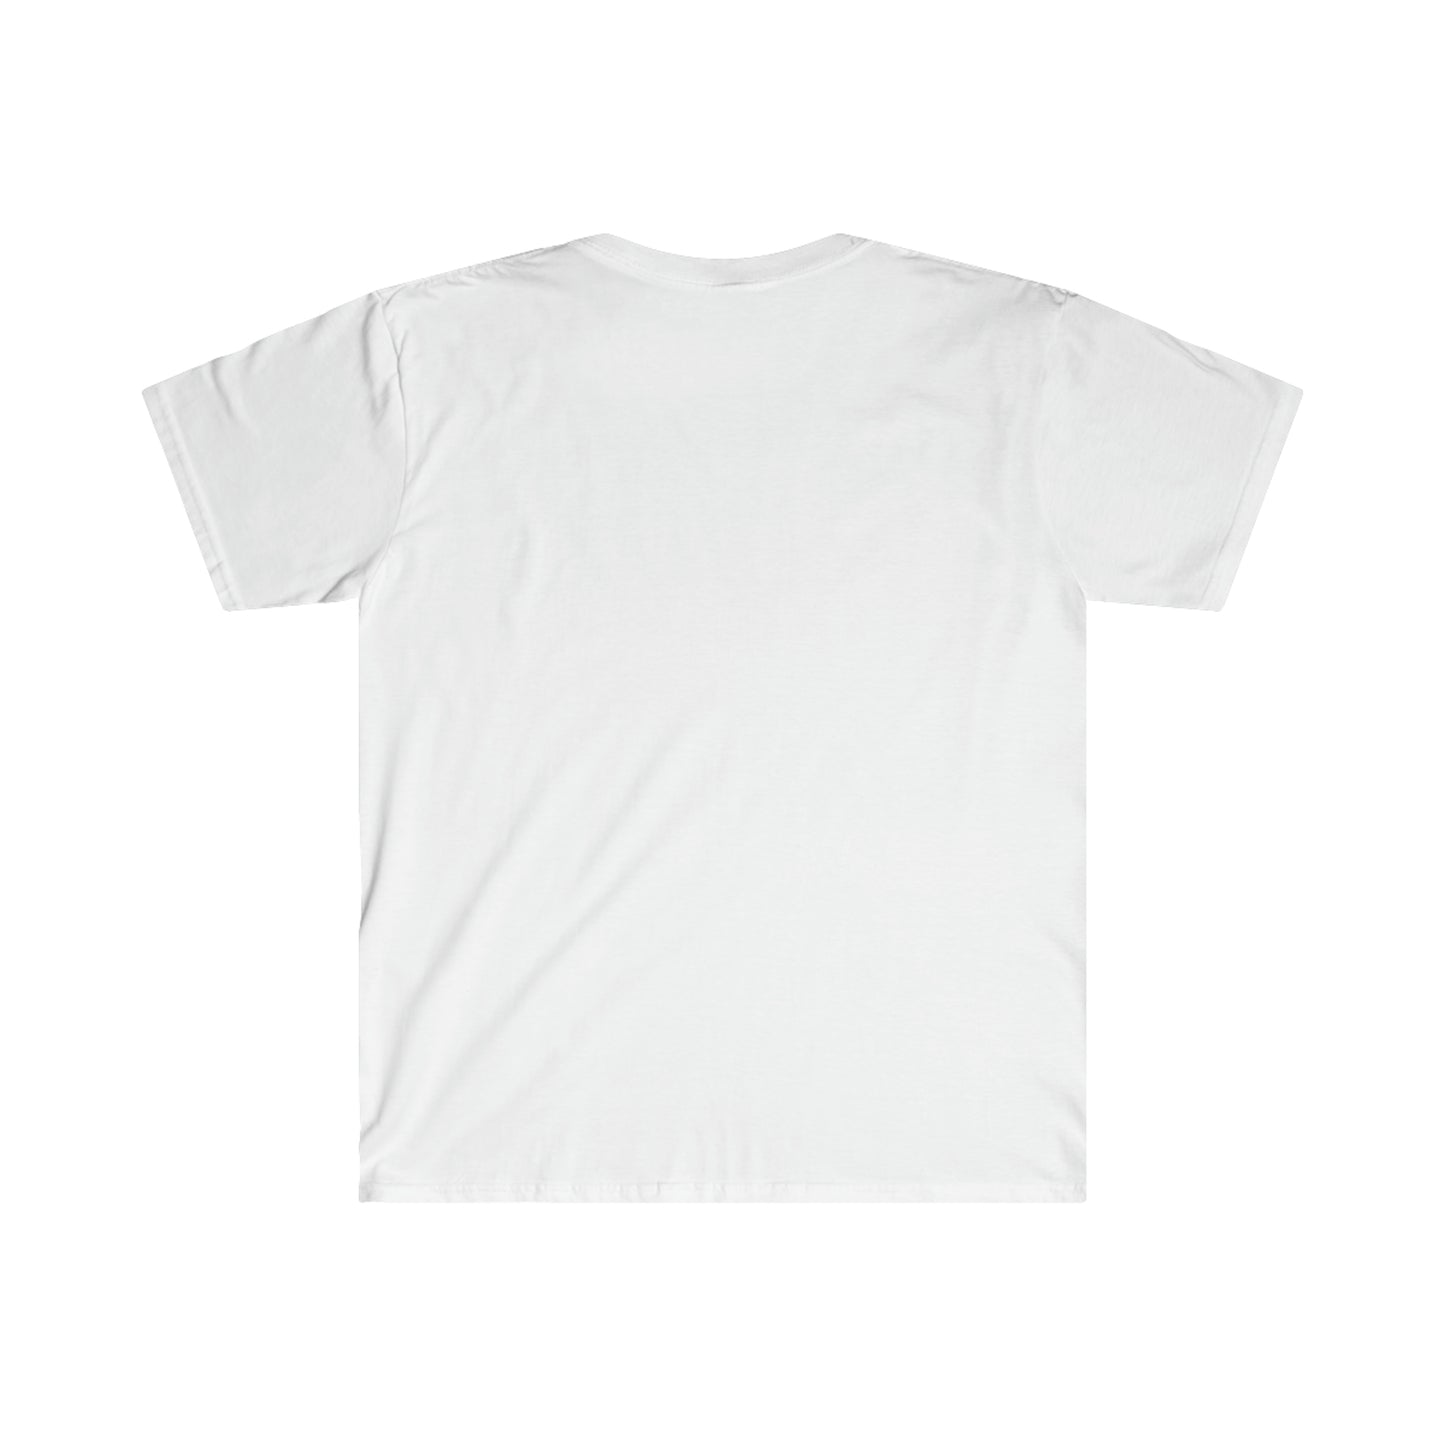 The Undecided Store Line Logo T shirt